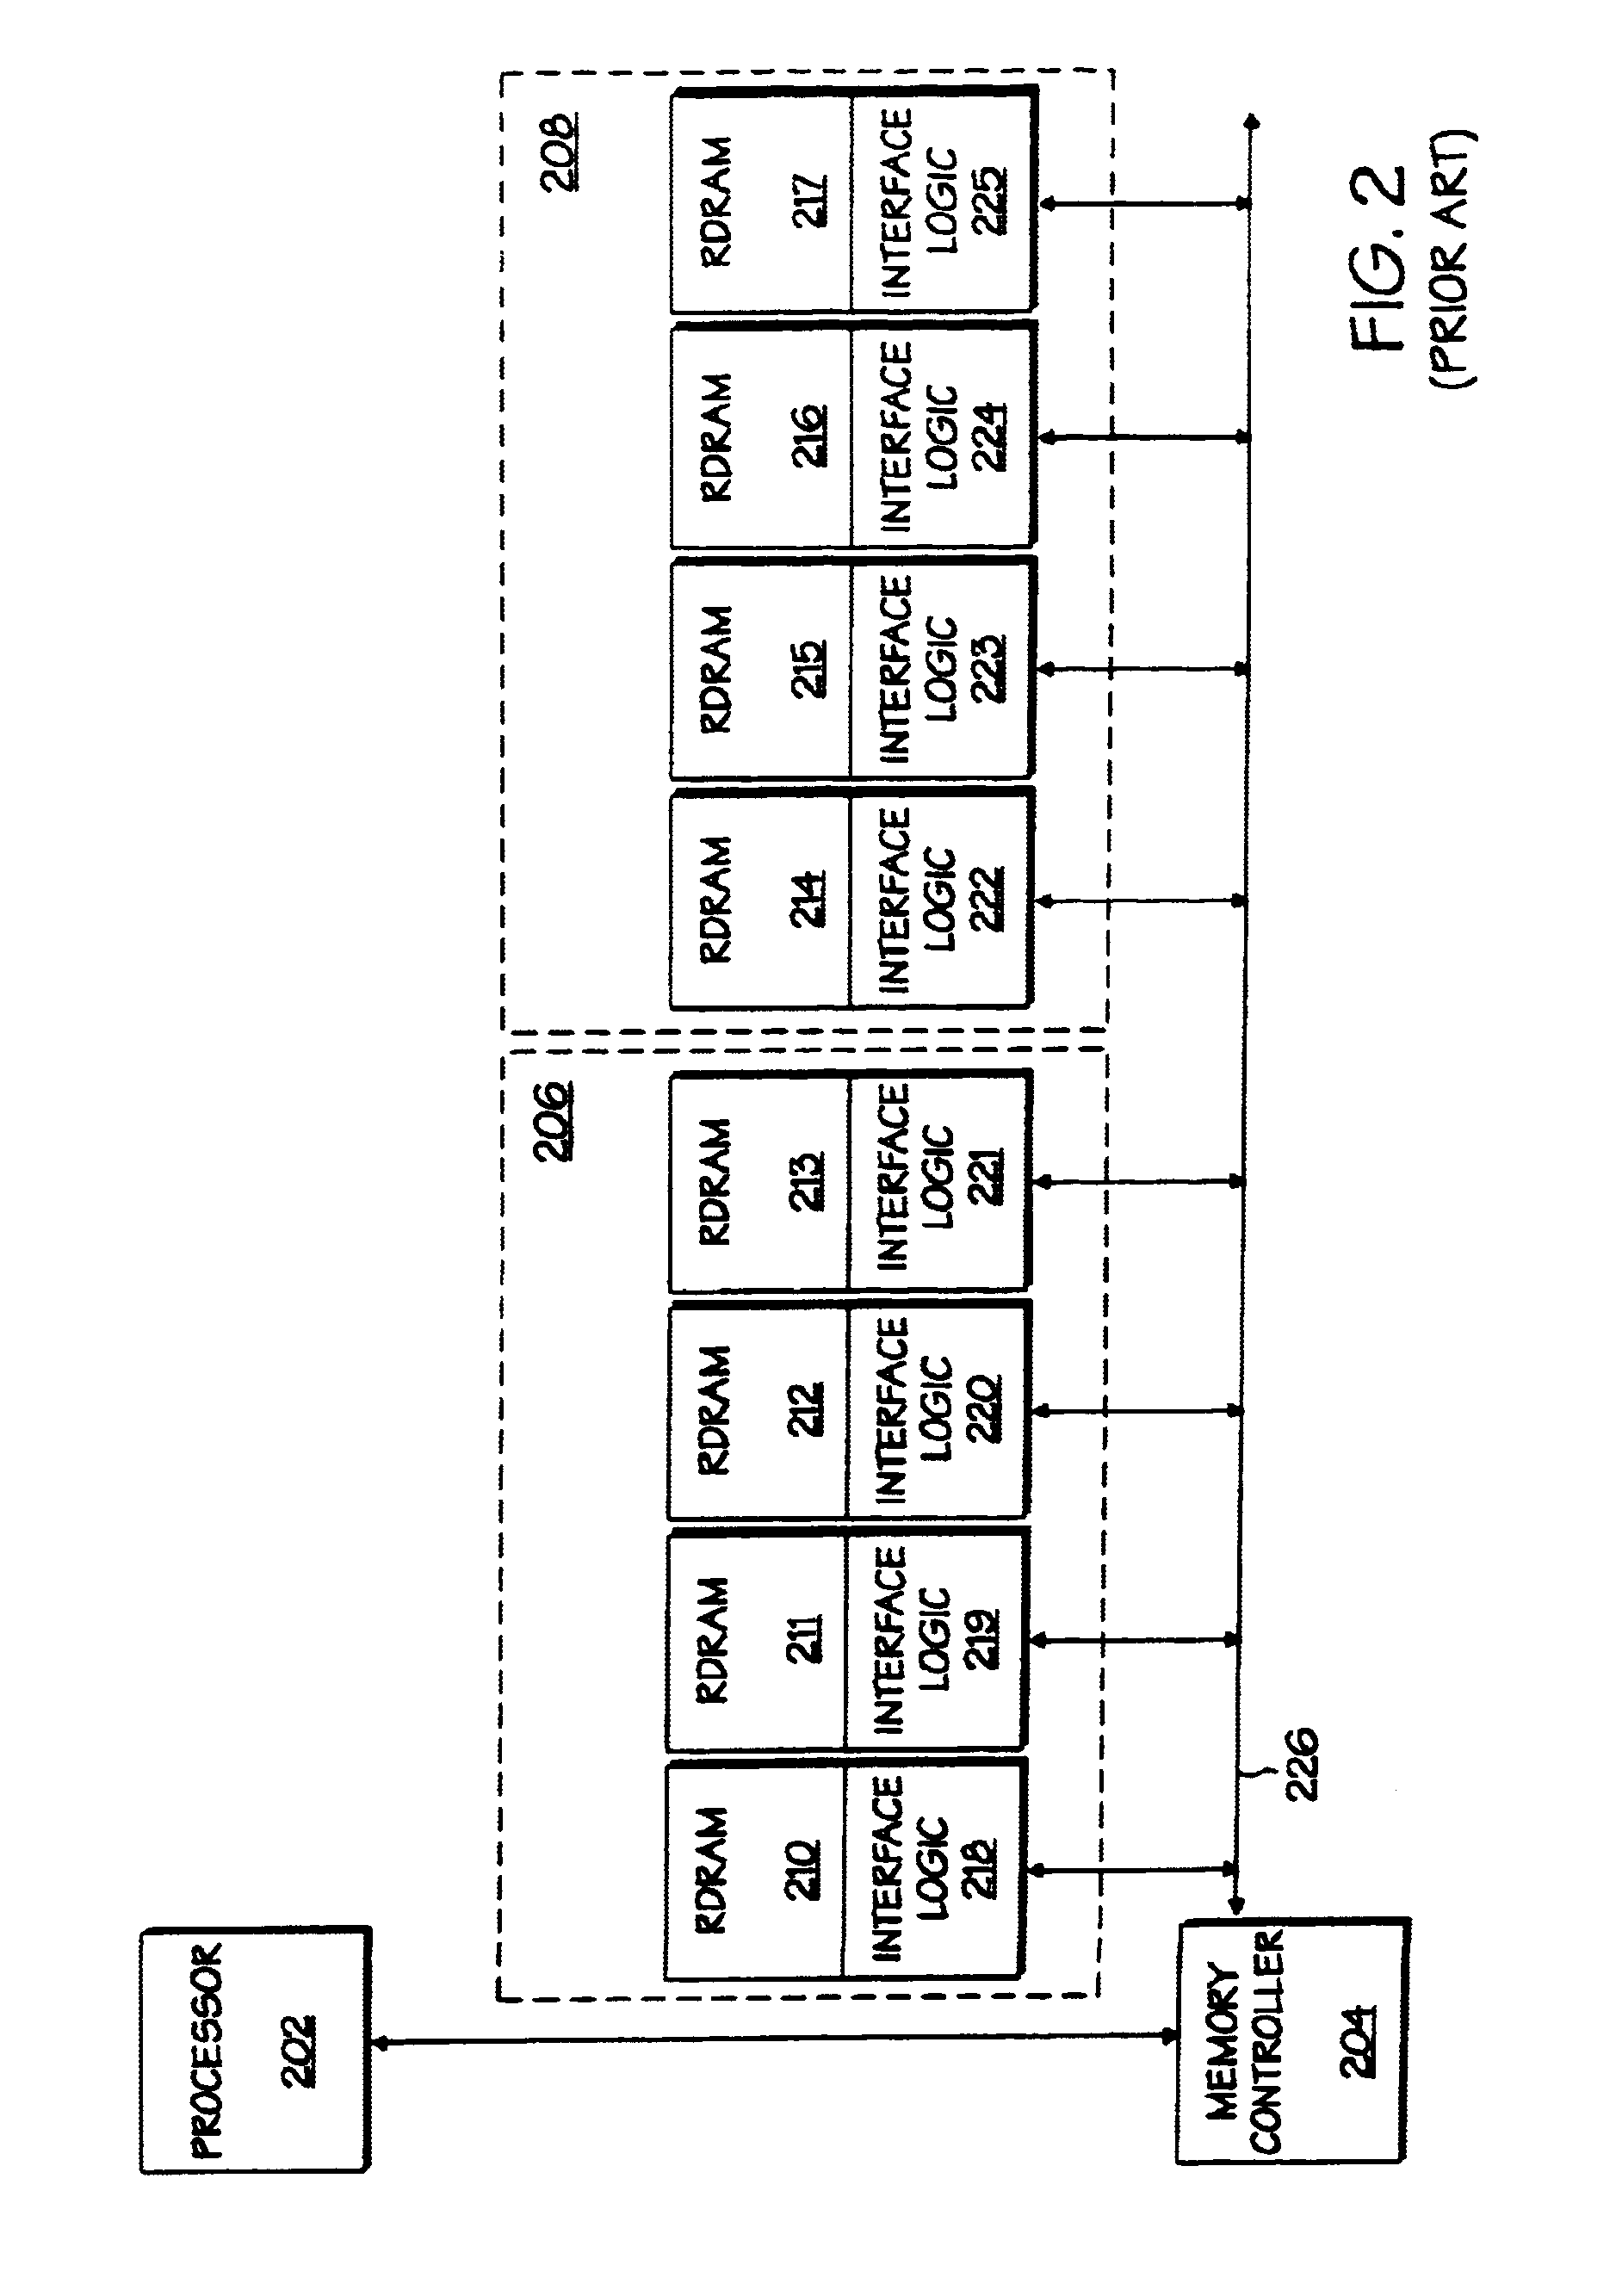 Memory module controller for providing an interface between a system memory controller and a plurality of memory devices on a memory module